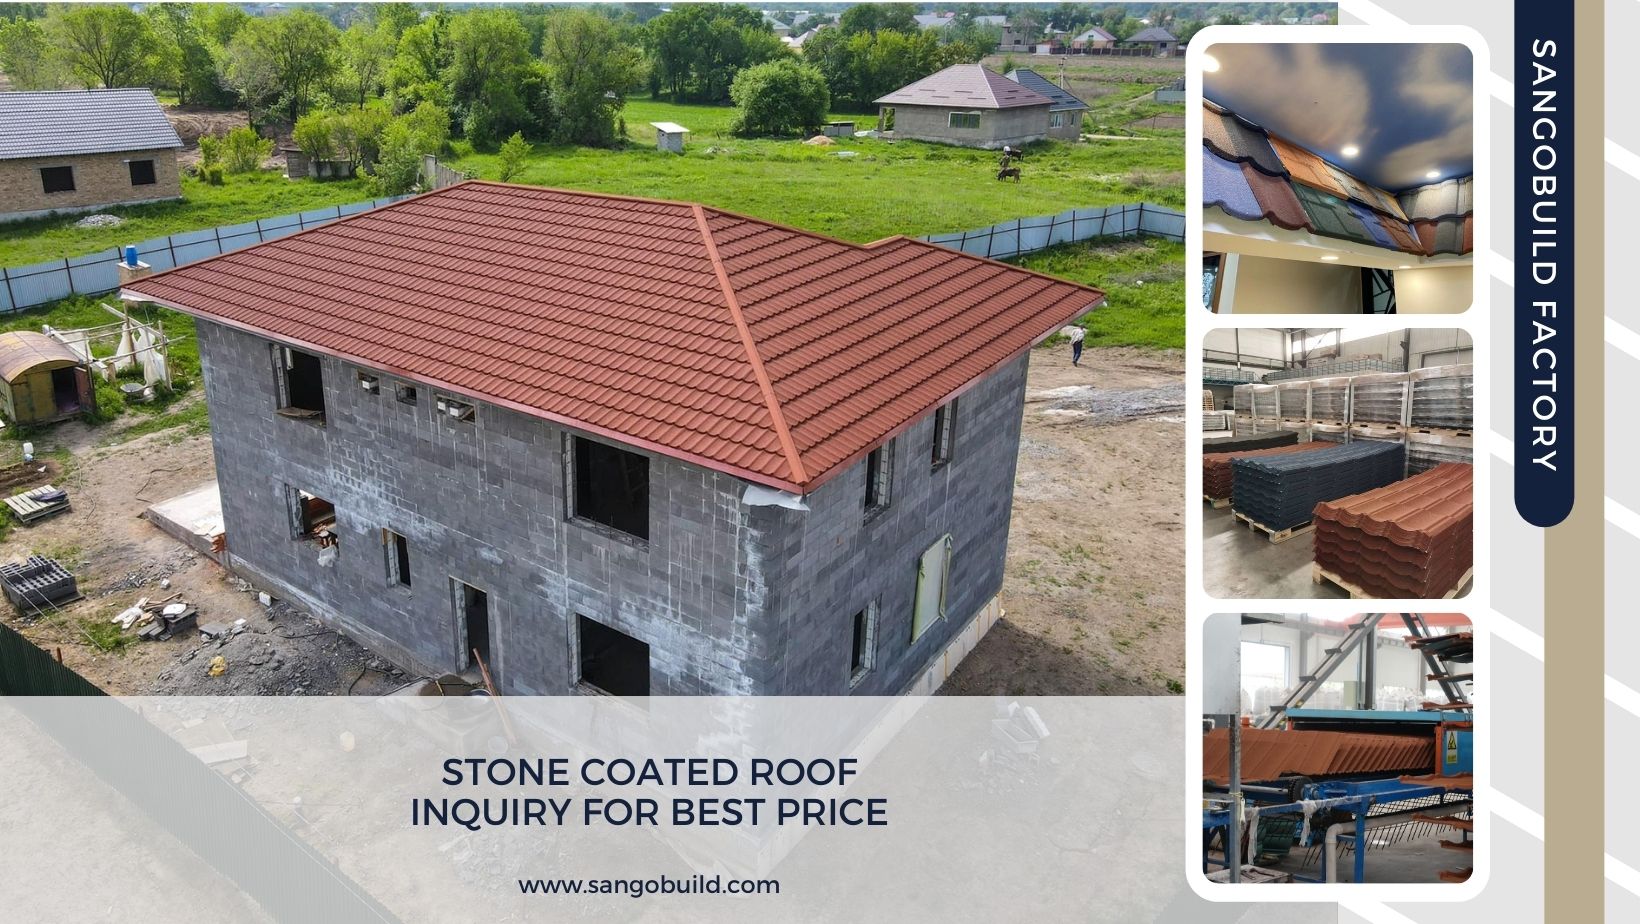 What Are Stone Coated Metal Roof Tiles Made Of